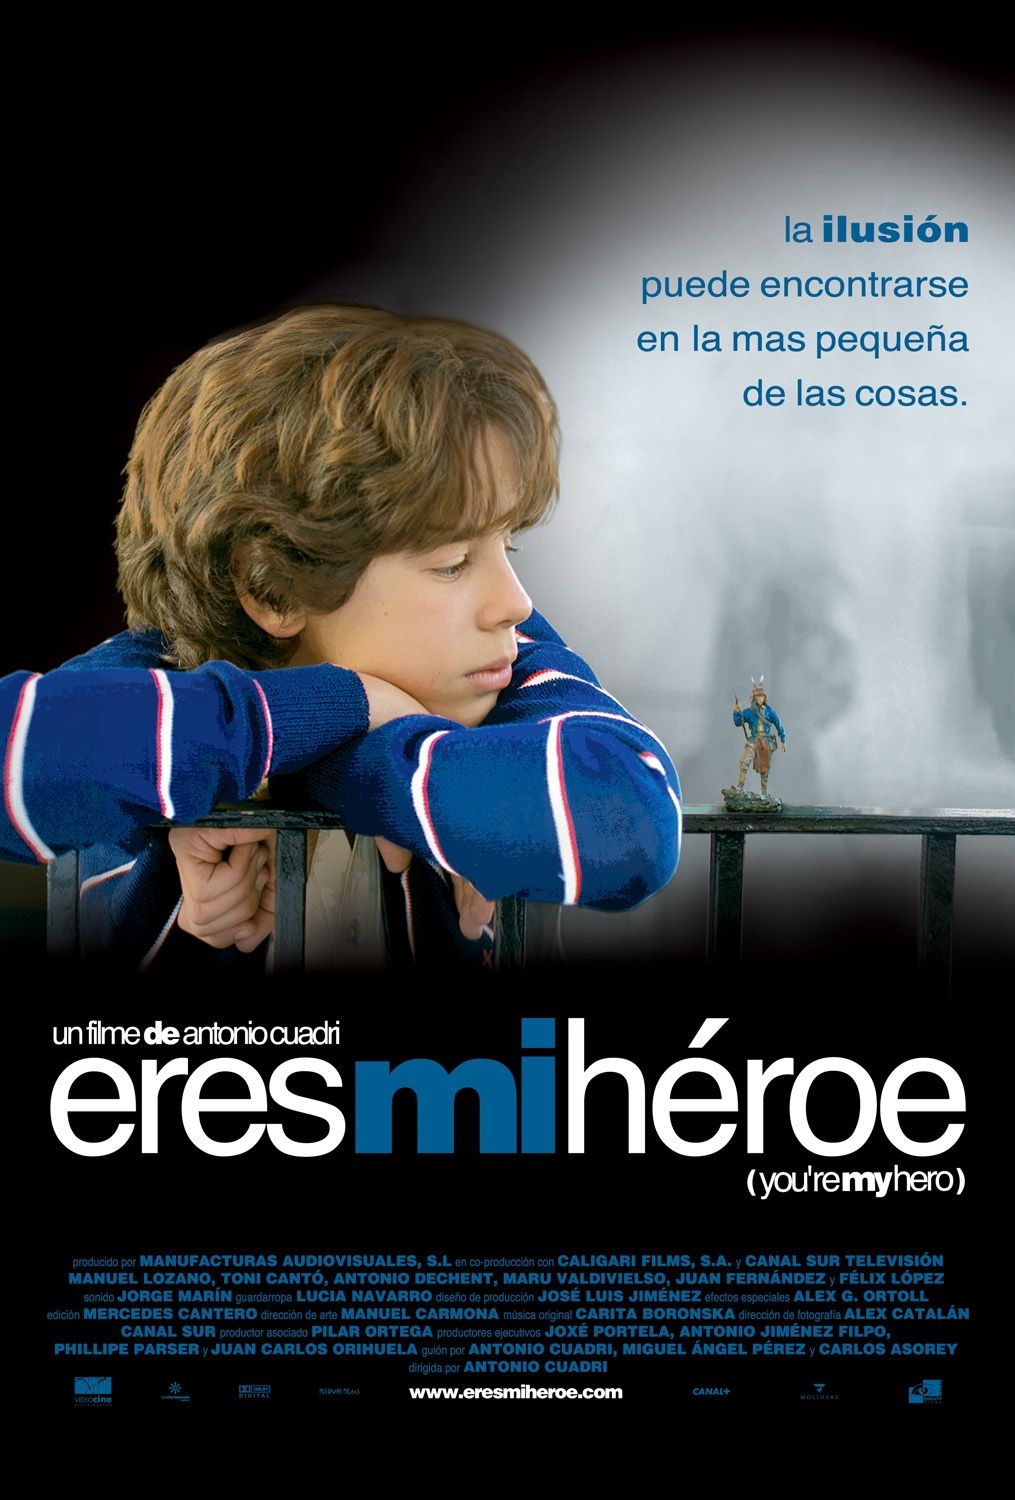 Extra Large Movie Poster Image for Eres mi héroe (#2 of 2)